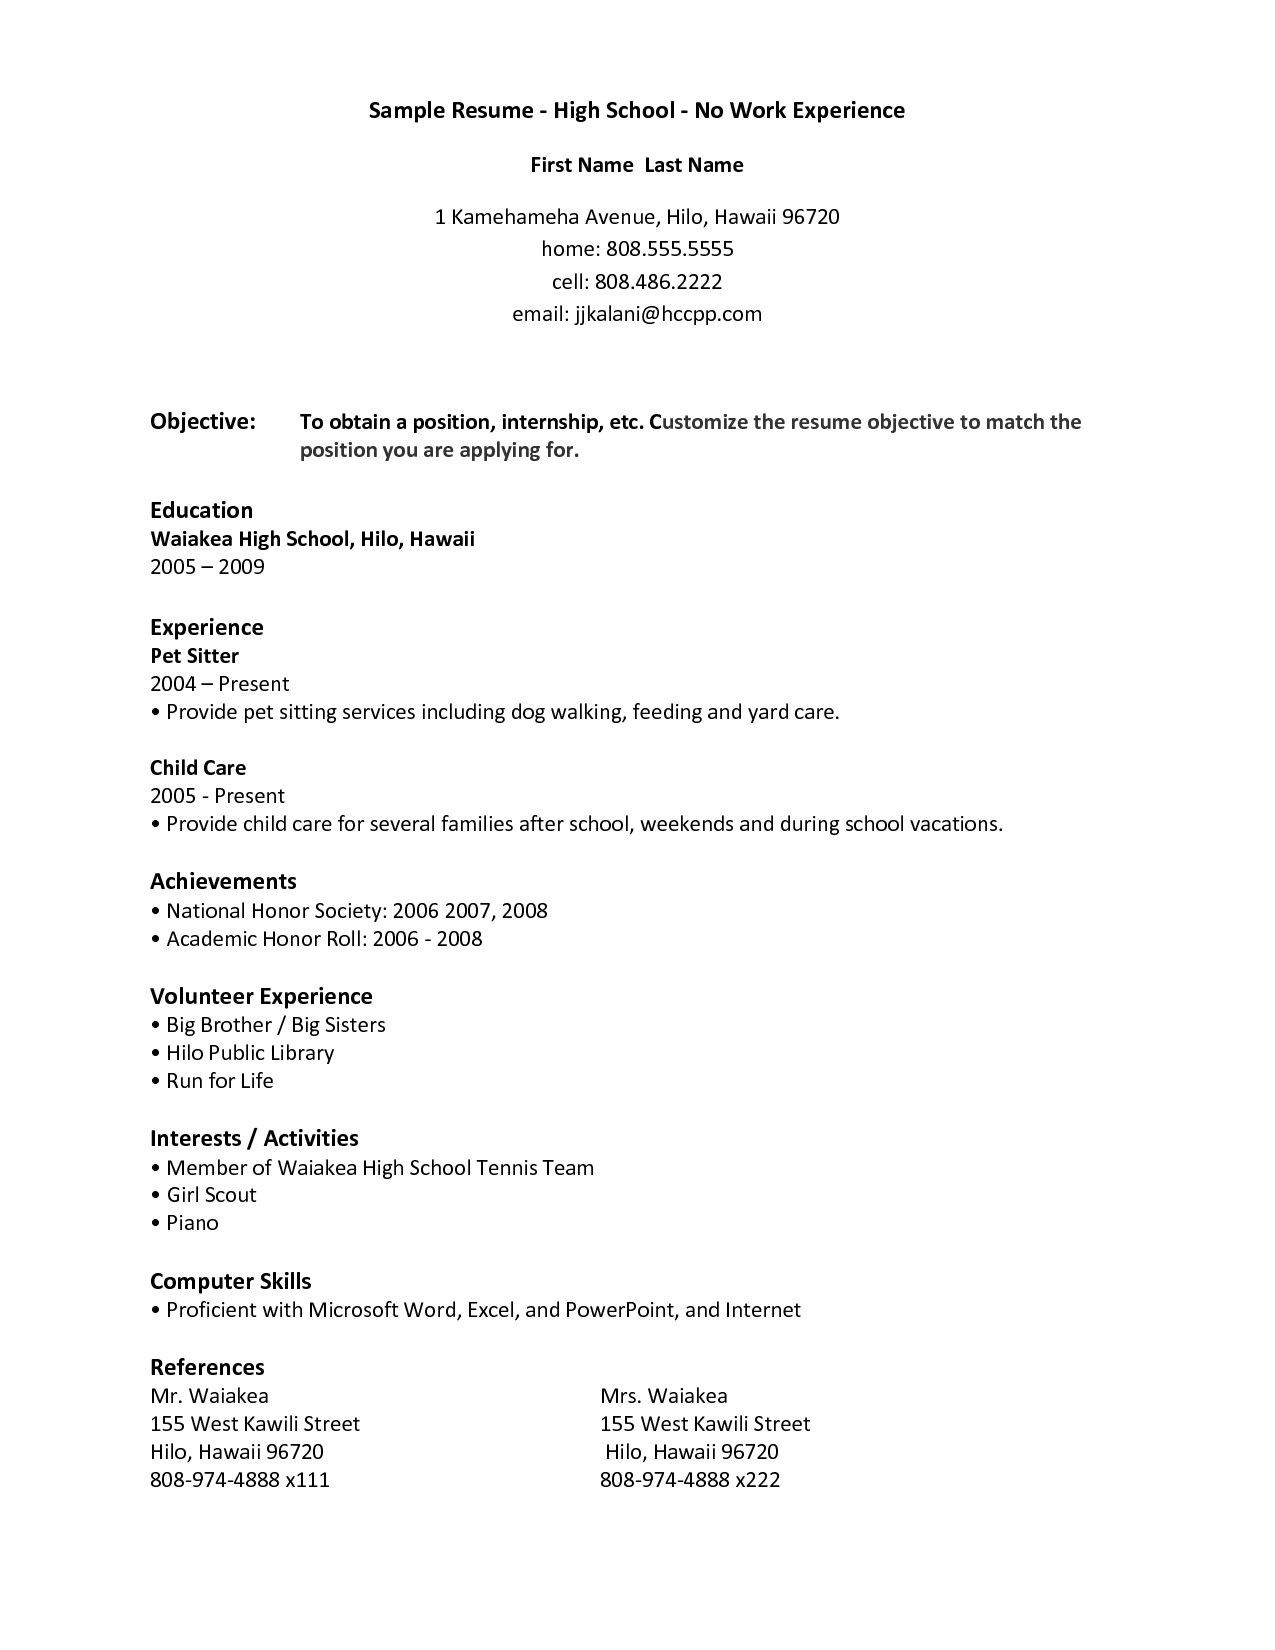 Resume Samples with Little Work Experience Free Resume Templates No Work Experience #experience …